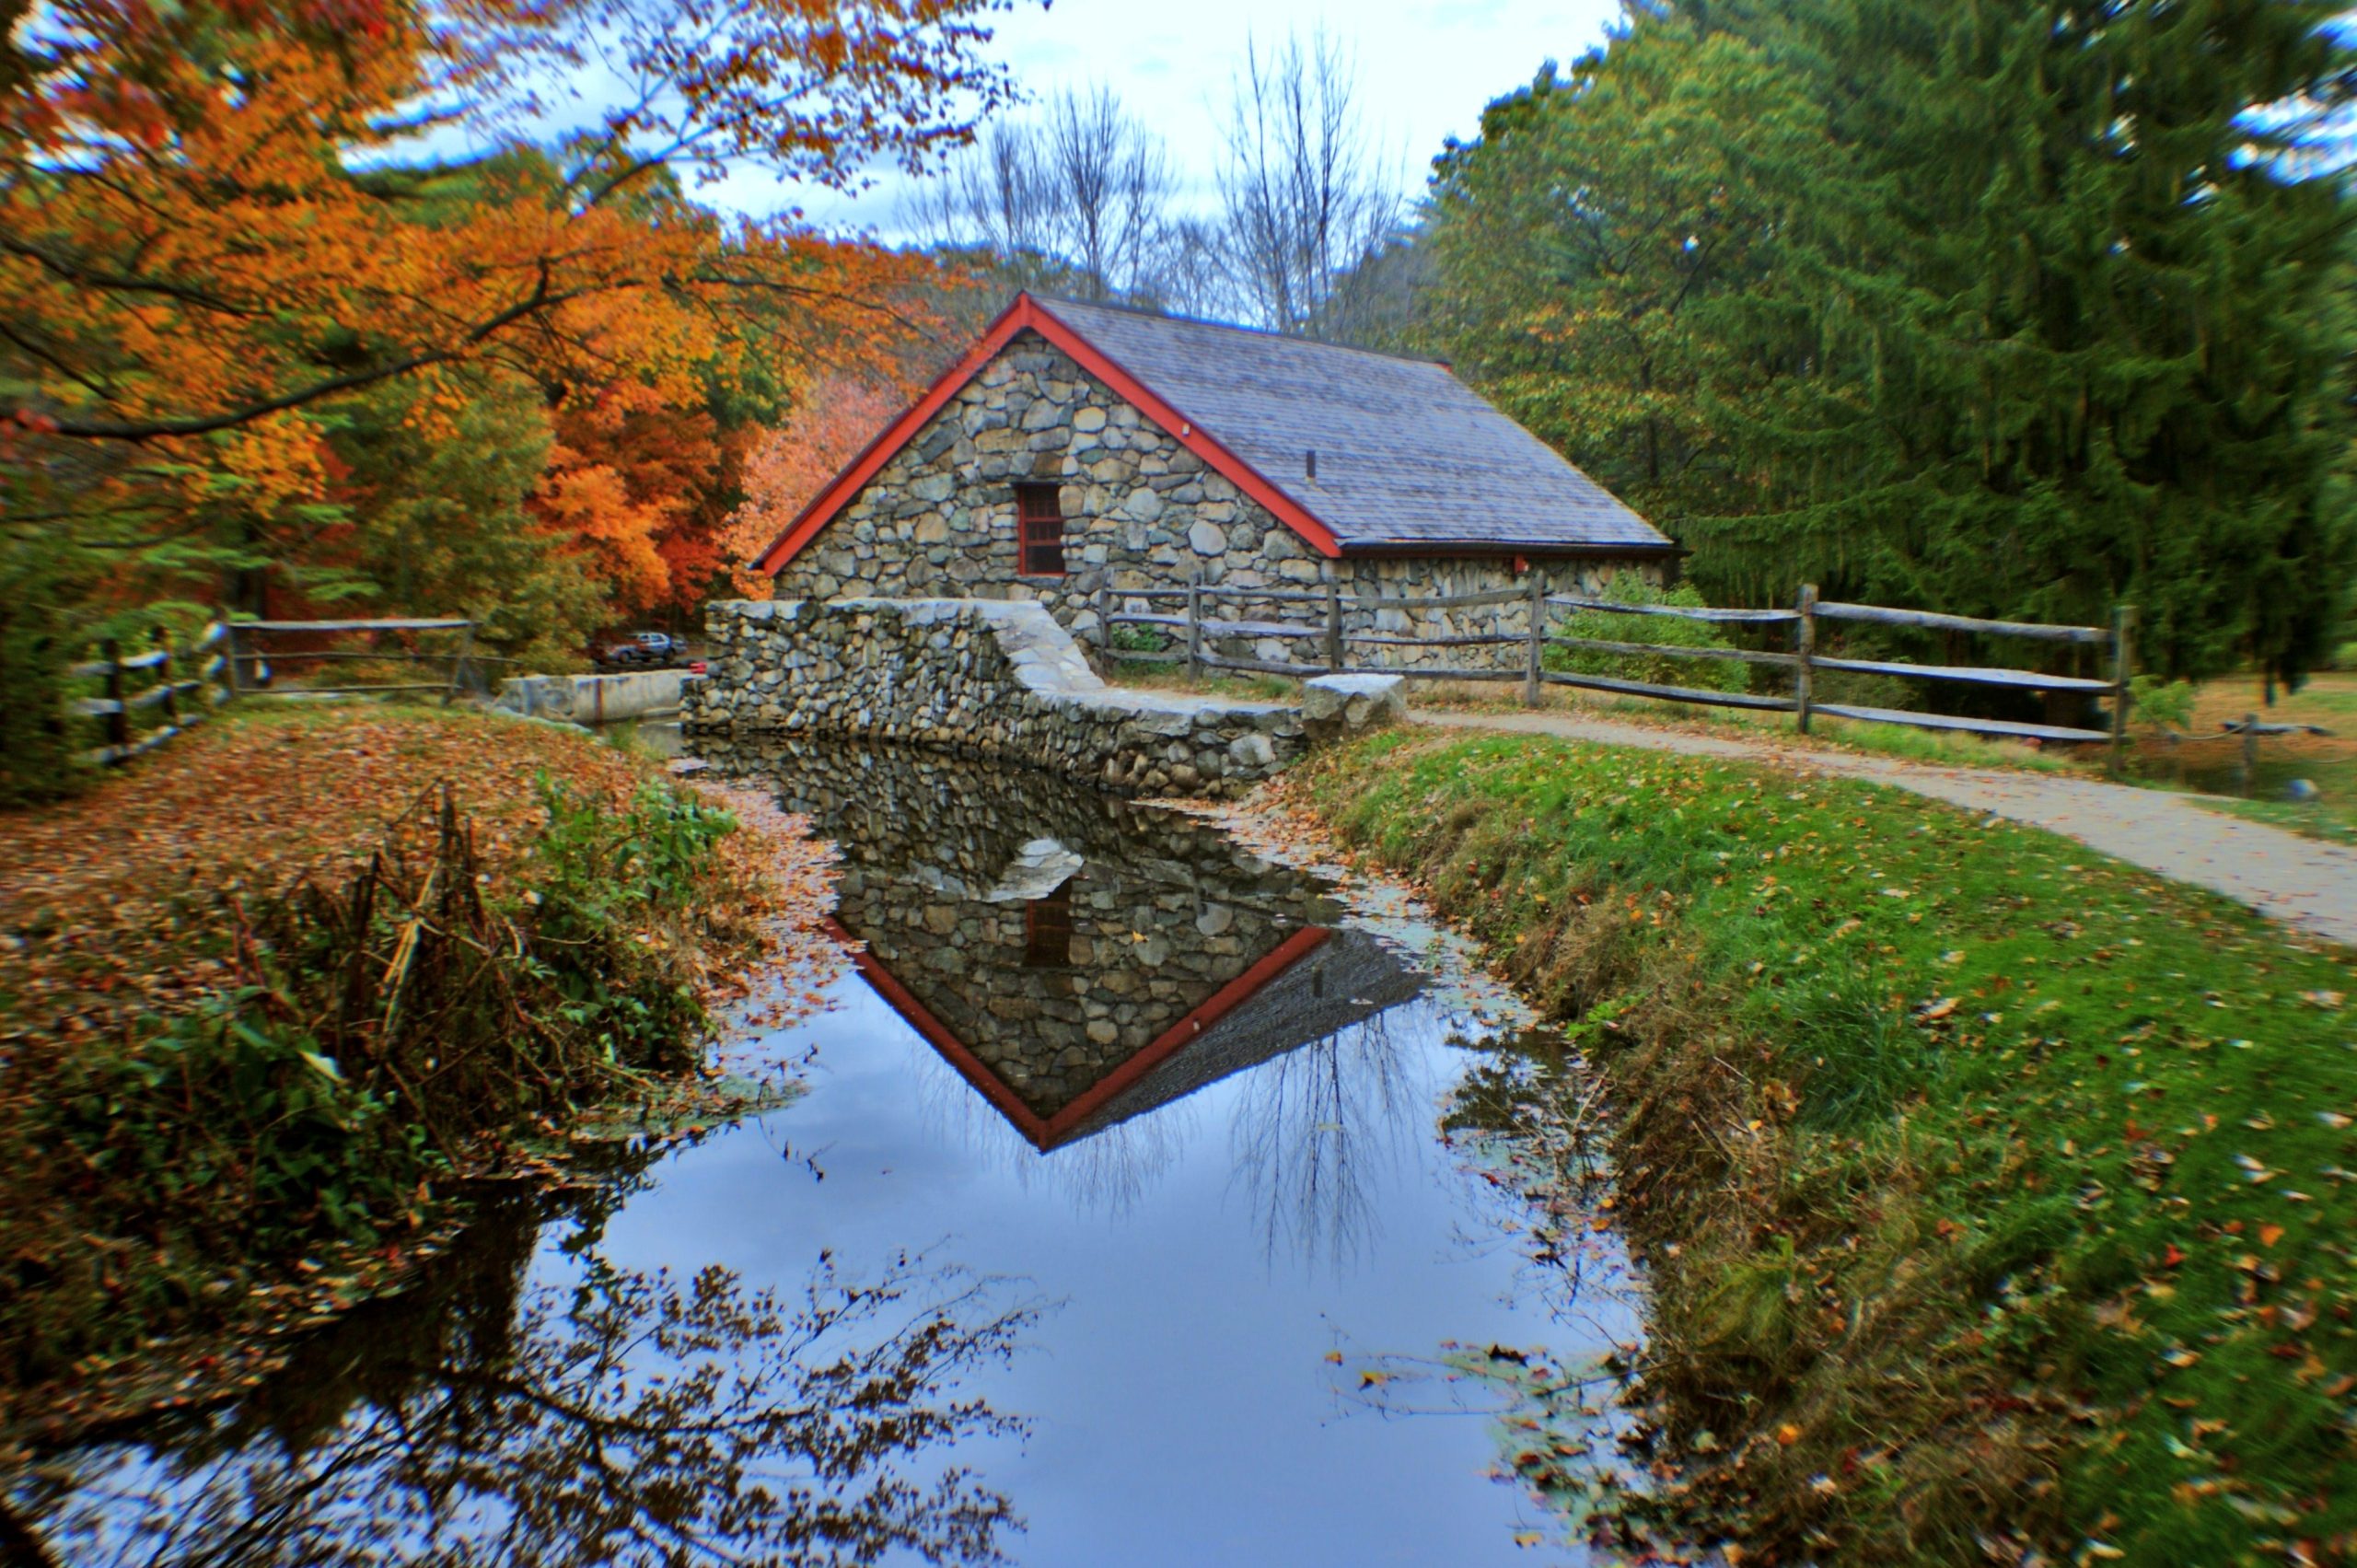 Above The Grist Mill (user submitted)